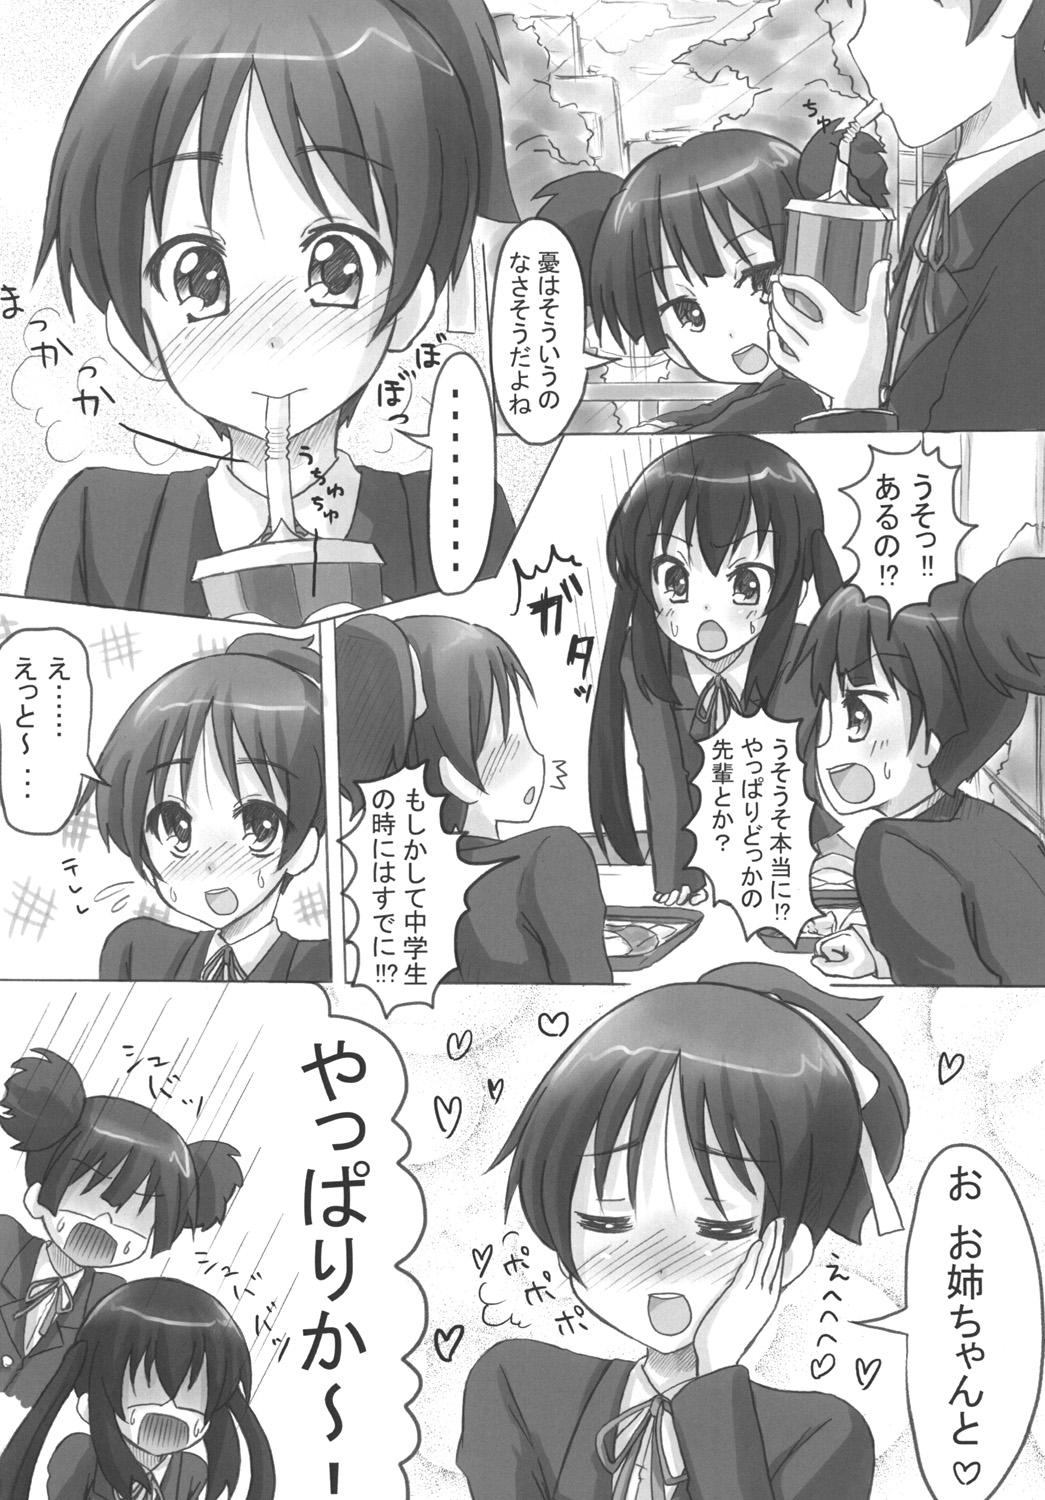 Glam Ui-chan LiLy Otome Talk - K-on Teensnow - Page 3